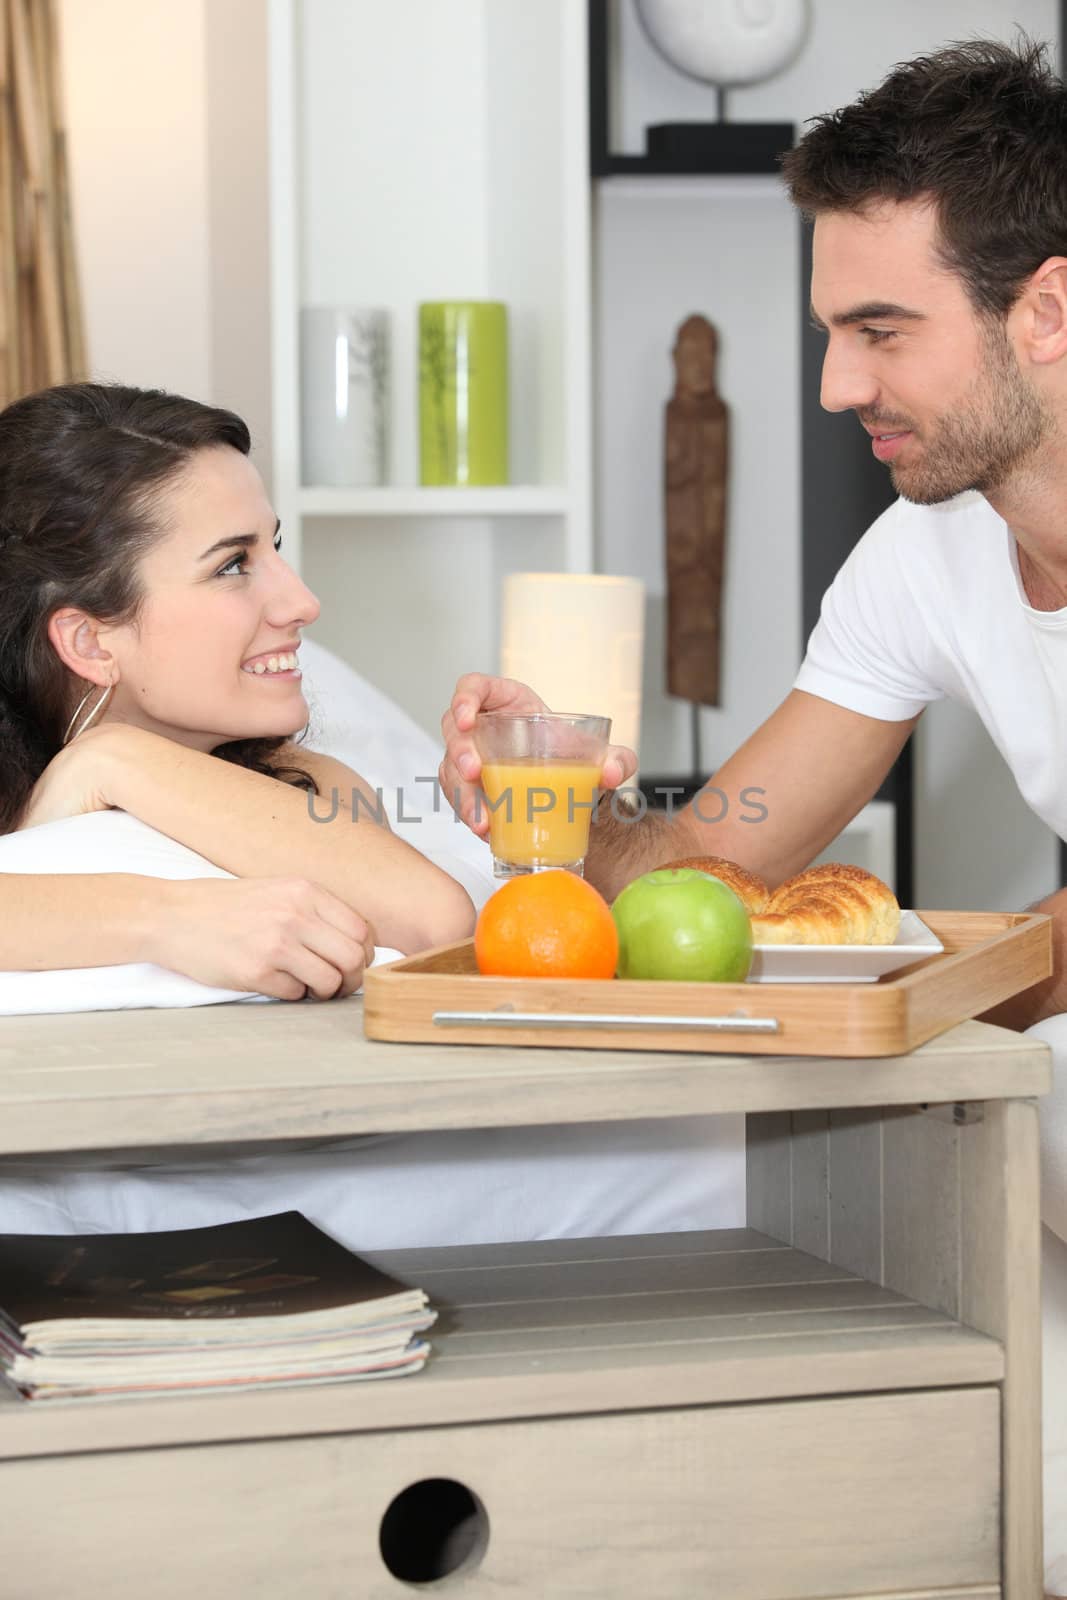 Couple enjoying romantic meal by phovoir